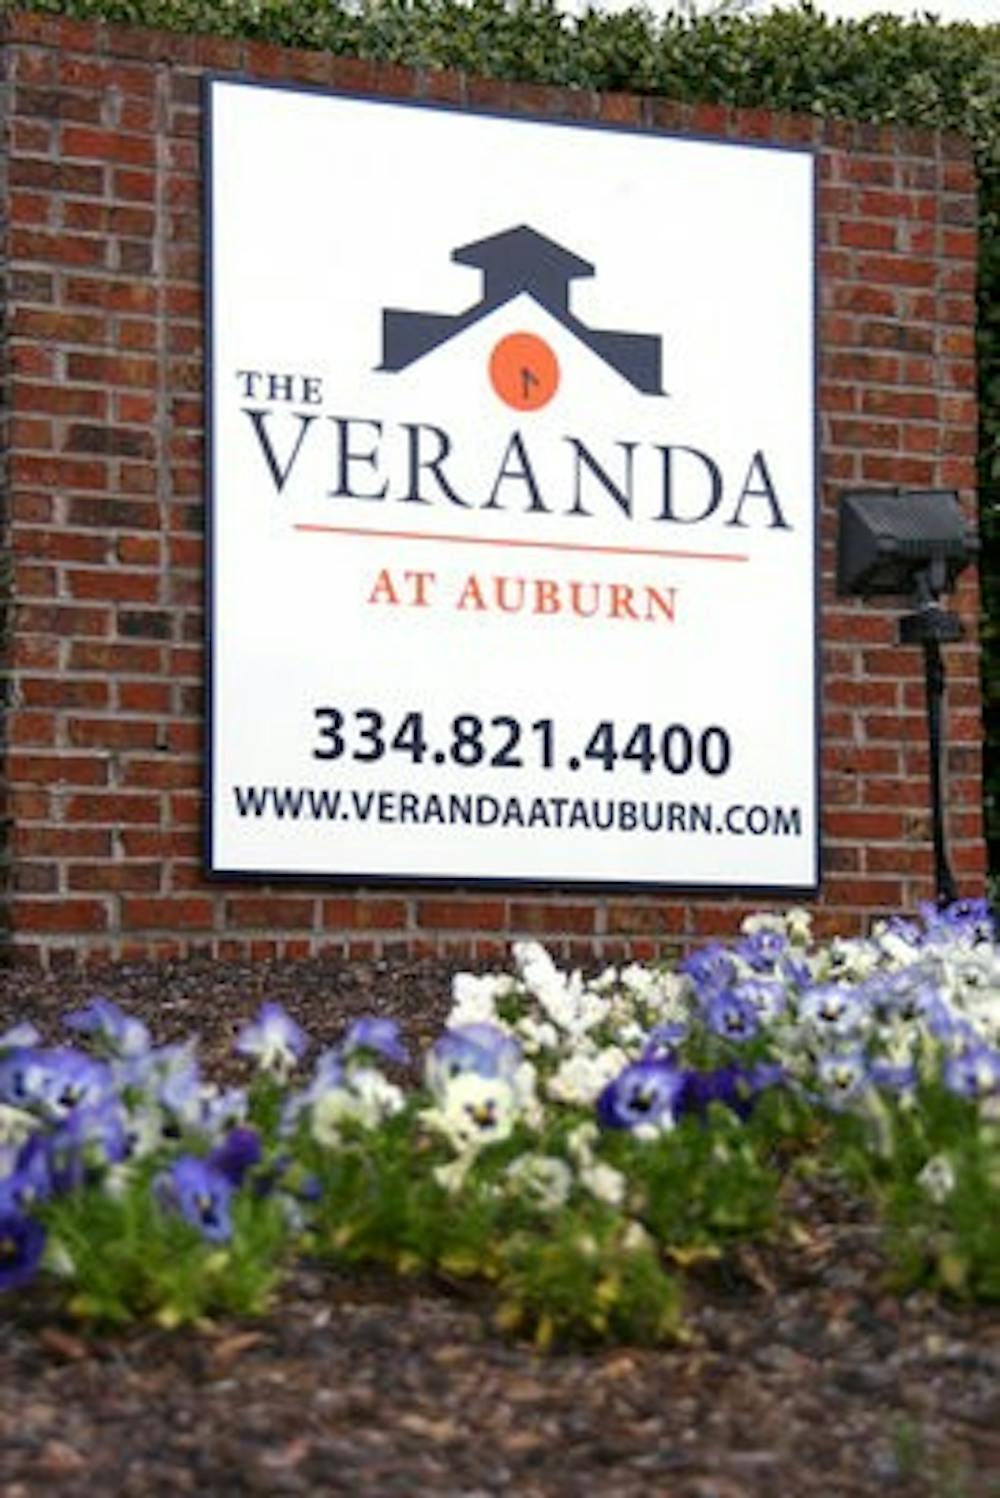 Auburn Crossing on Wire Road has received renovations and has been renamed The Veranda at Auburn. (Rebekah Weaver / ASSISTANT PHOTO EDITOR)